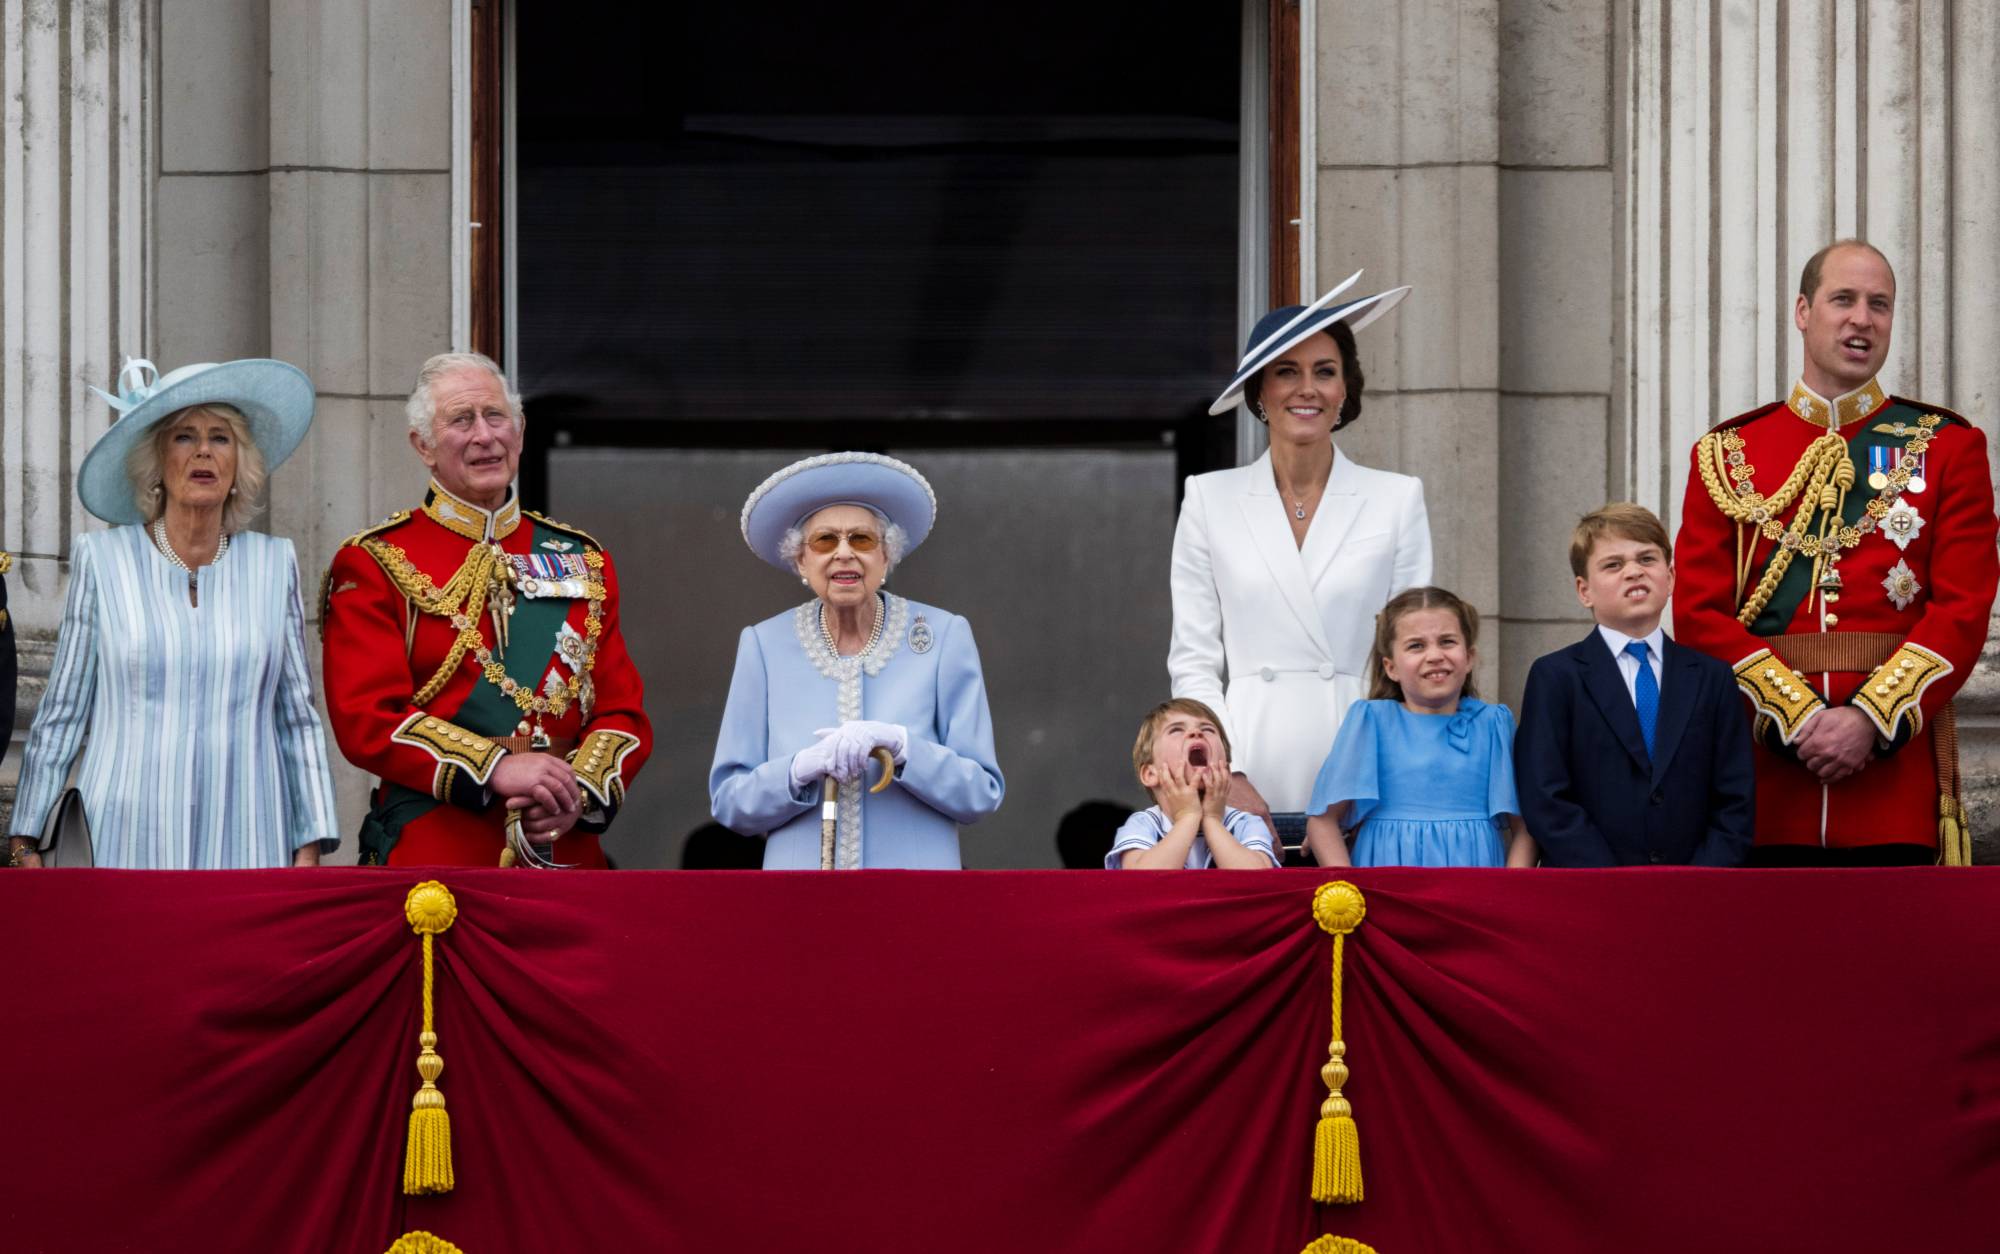 How Queen Elizabeth's hats became an enduring symbol of Britain's monarchy